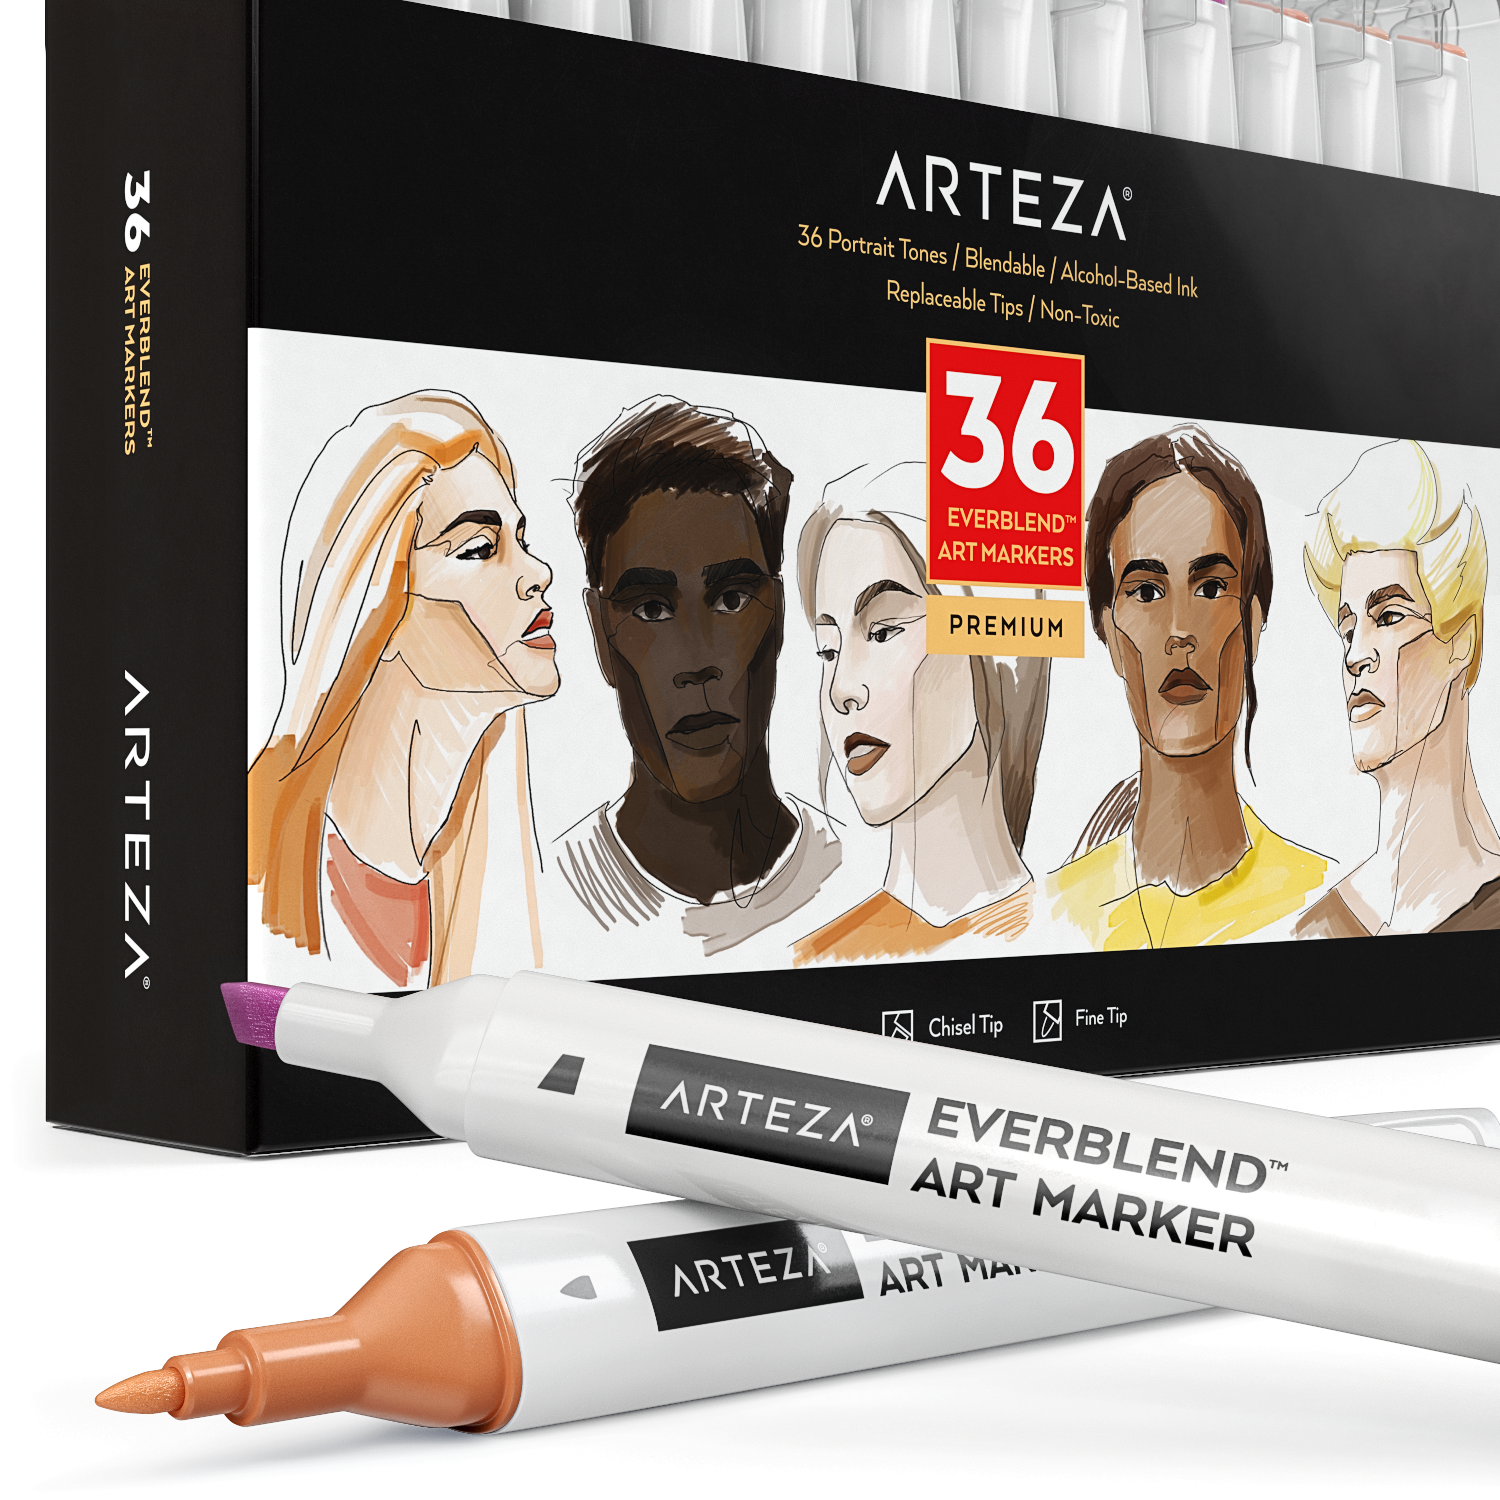 EverBlend Art Markers, Skin Tones, Single Color Tan Rose A609 by Arteza